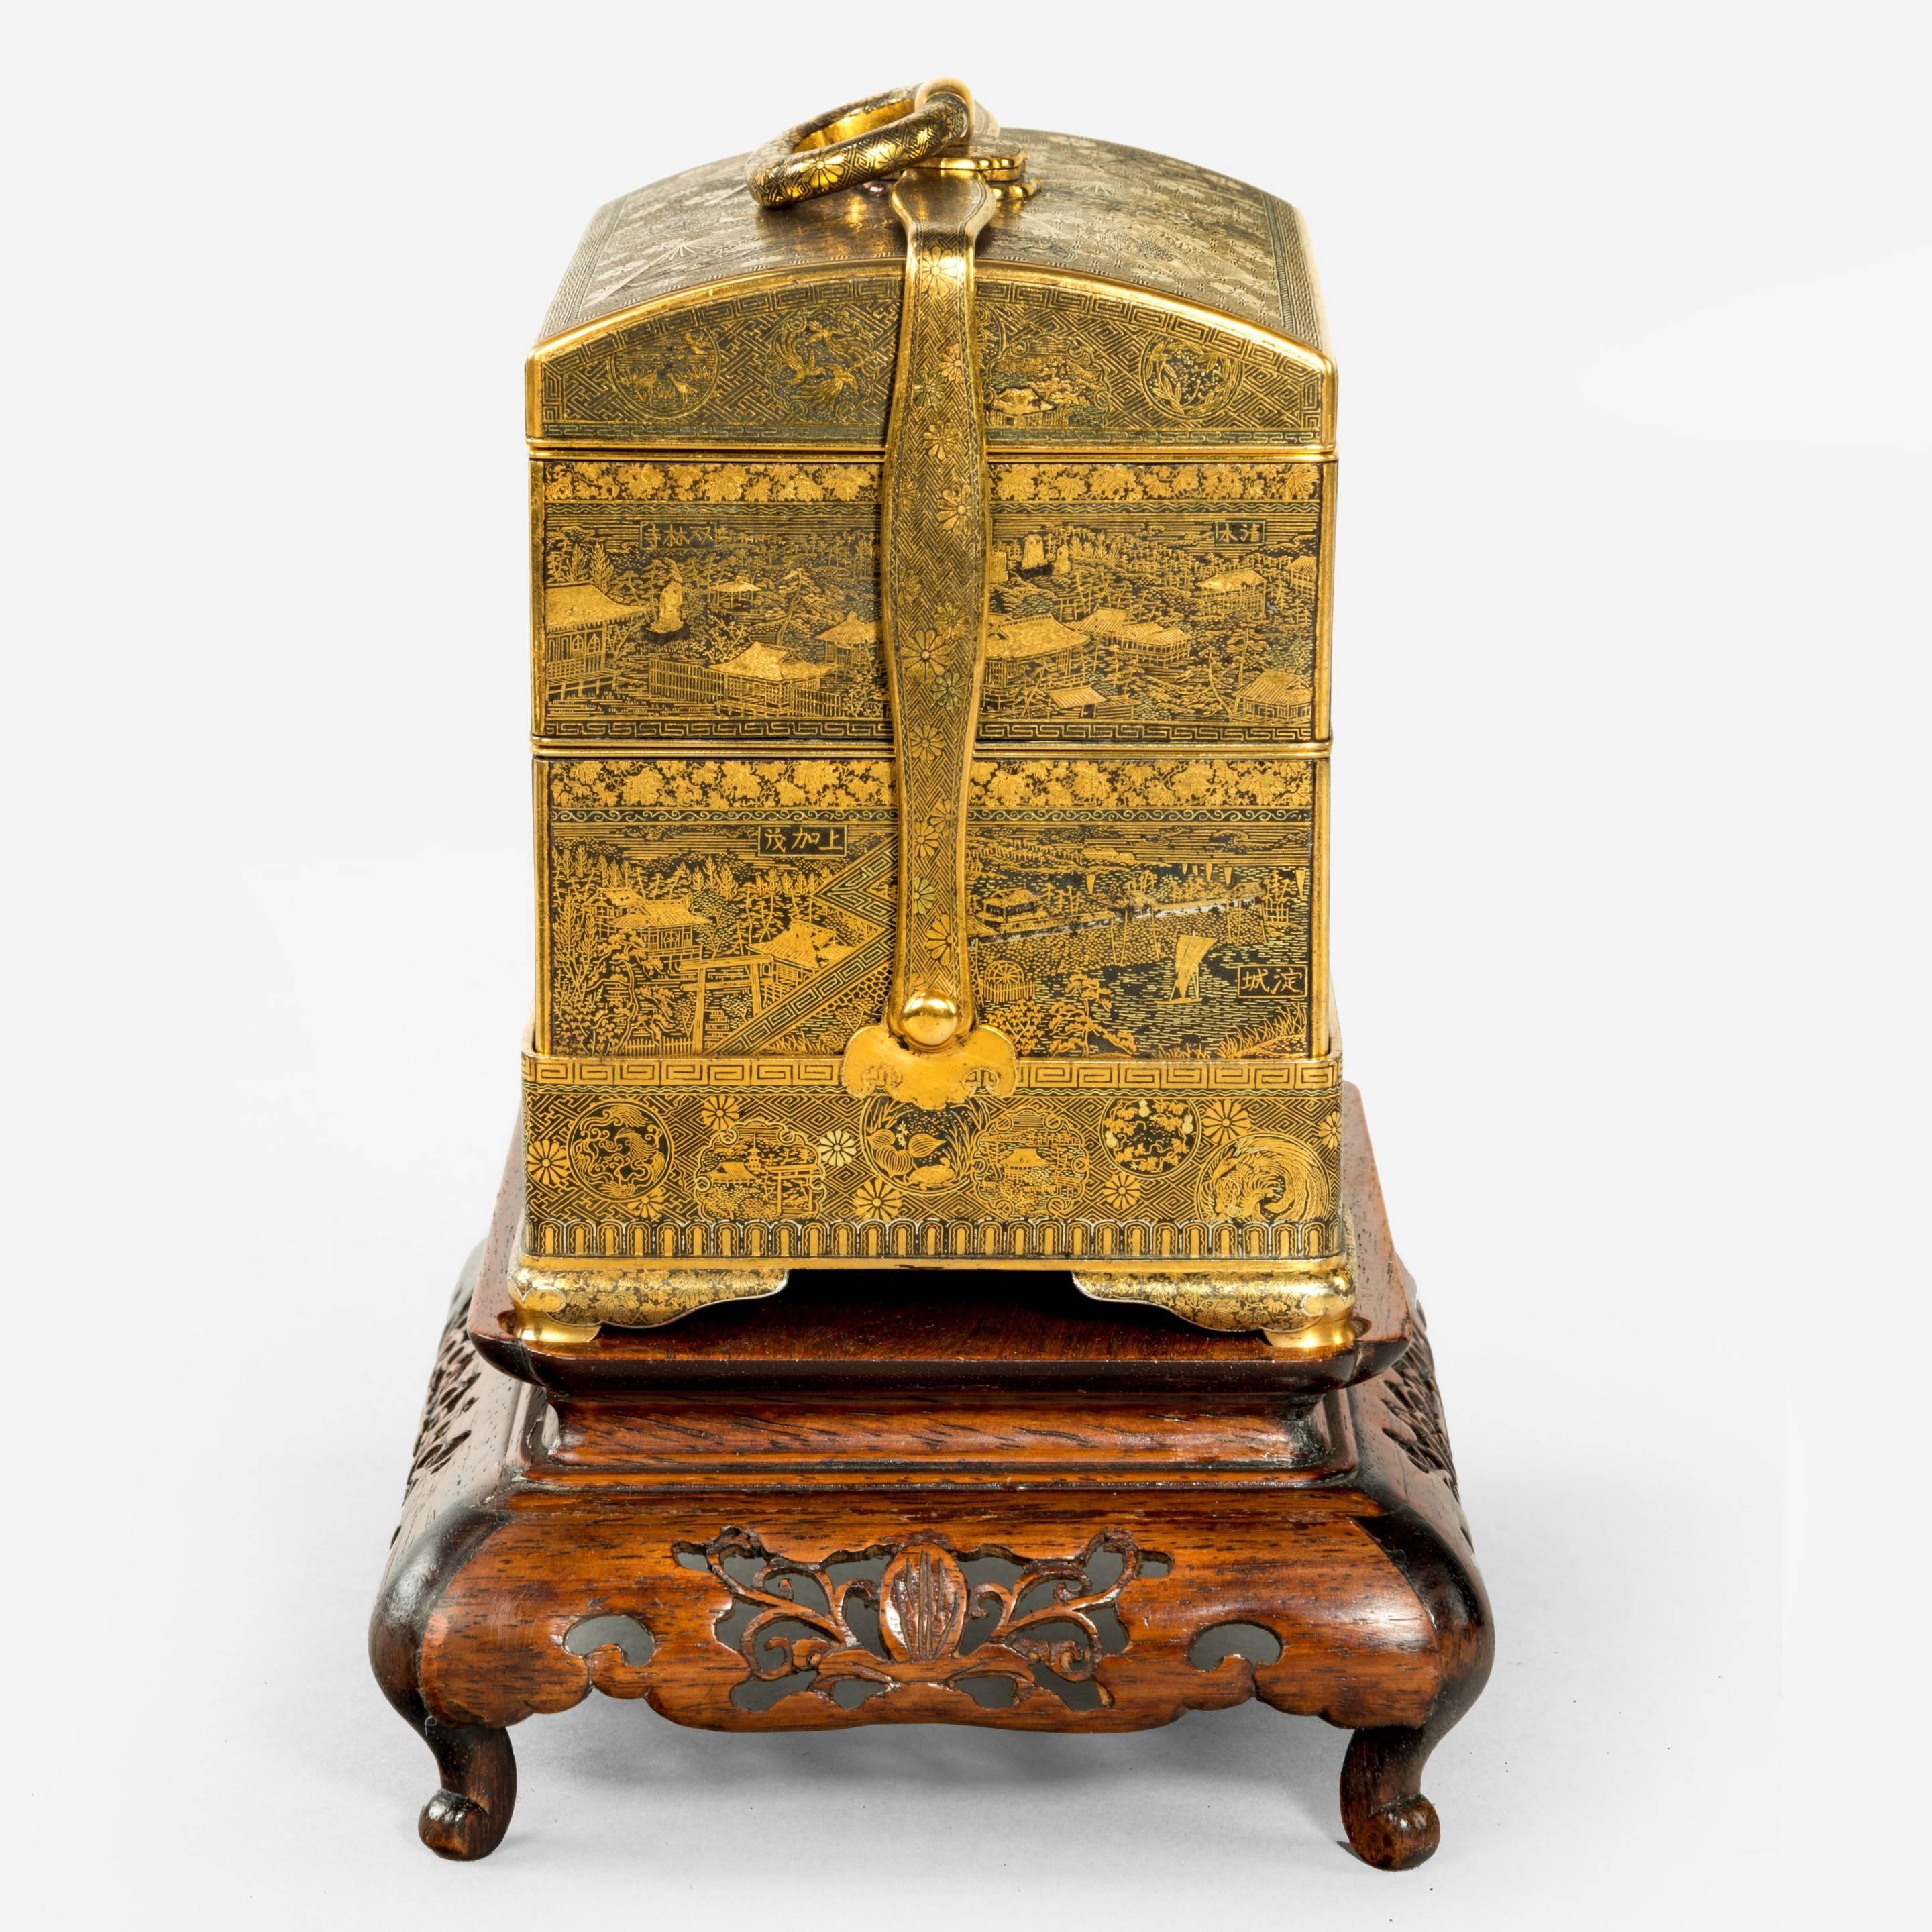 A superb and rare gold inlaid iron jubako (lunch box) by Komai of Kyoto 
Of typical form with three stacking trays secured by a hinged arm which locks into an oval carrying handle, the whole intricately decorated with profuse inlays of various